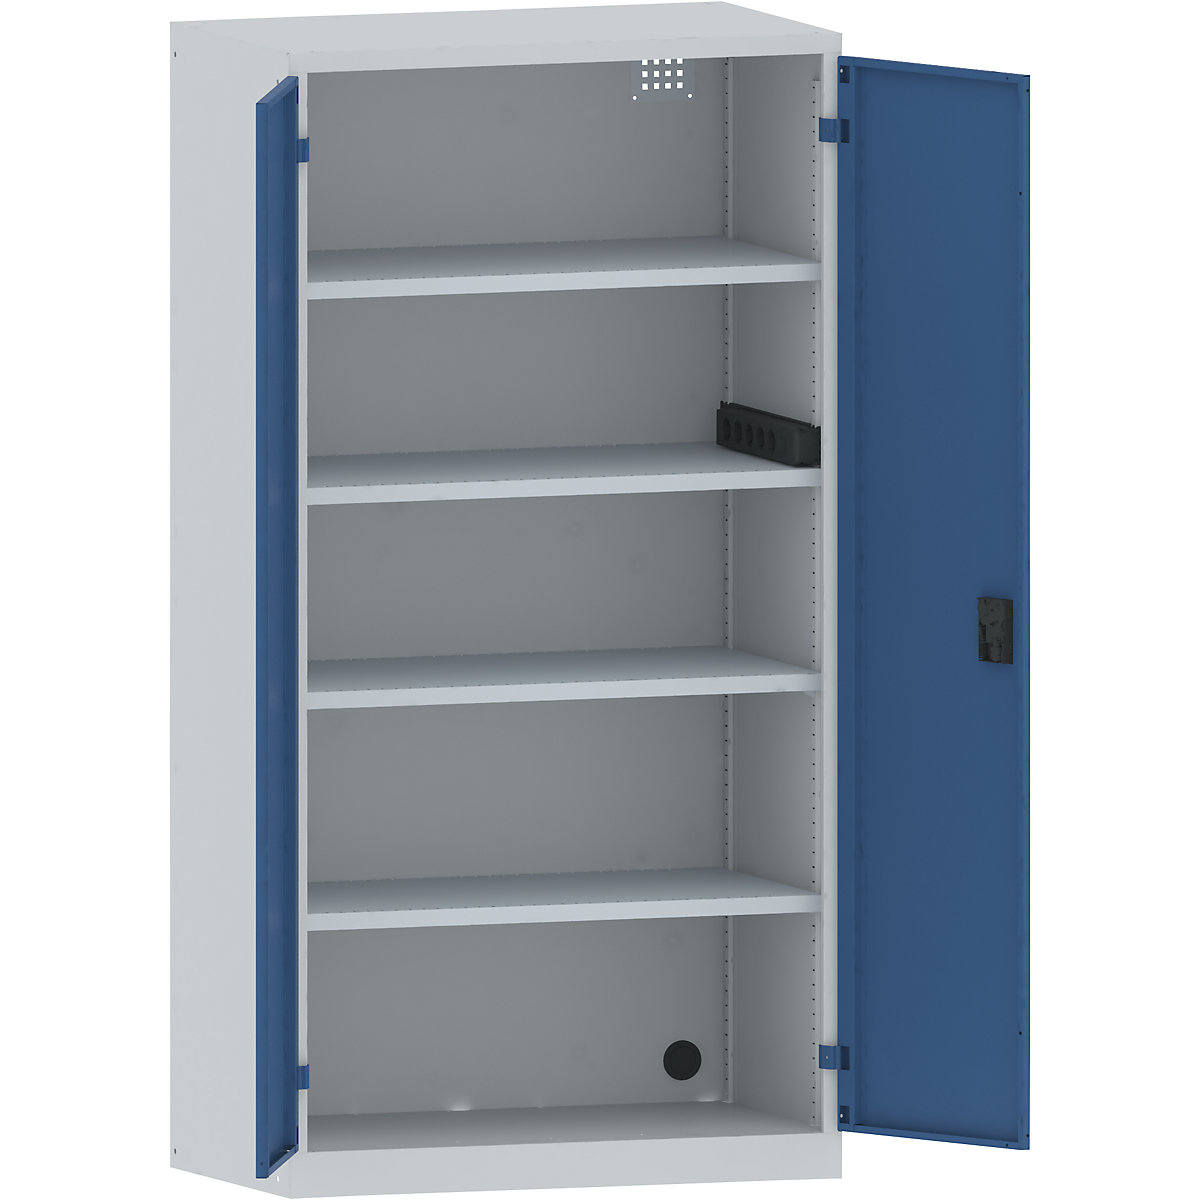 Battery charging cabinet – LISTA, 4 shelves, solid panel doors, power strip at side, grey / blue-7